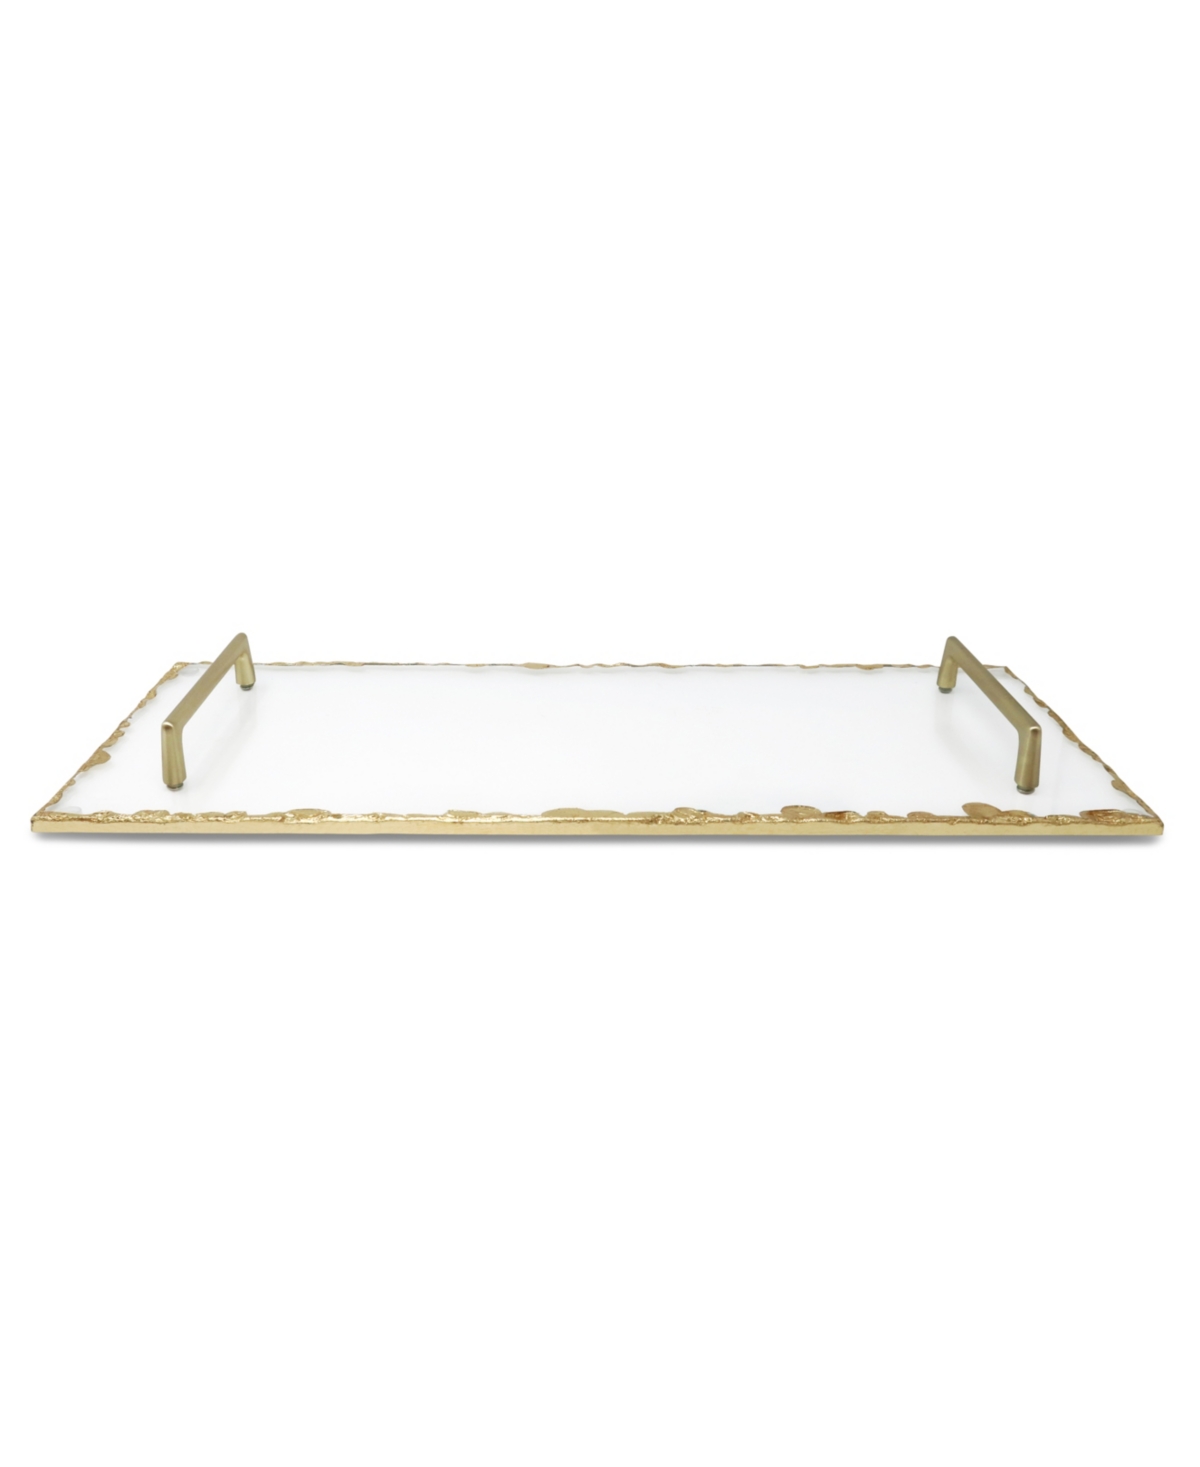 Glass Tray with Gold-Tone Rim and Handles, 19.75" L - Gold